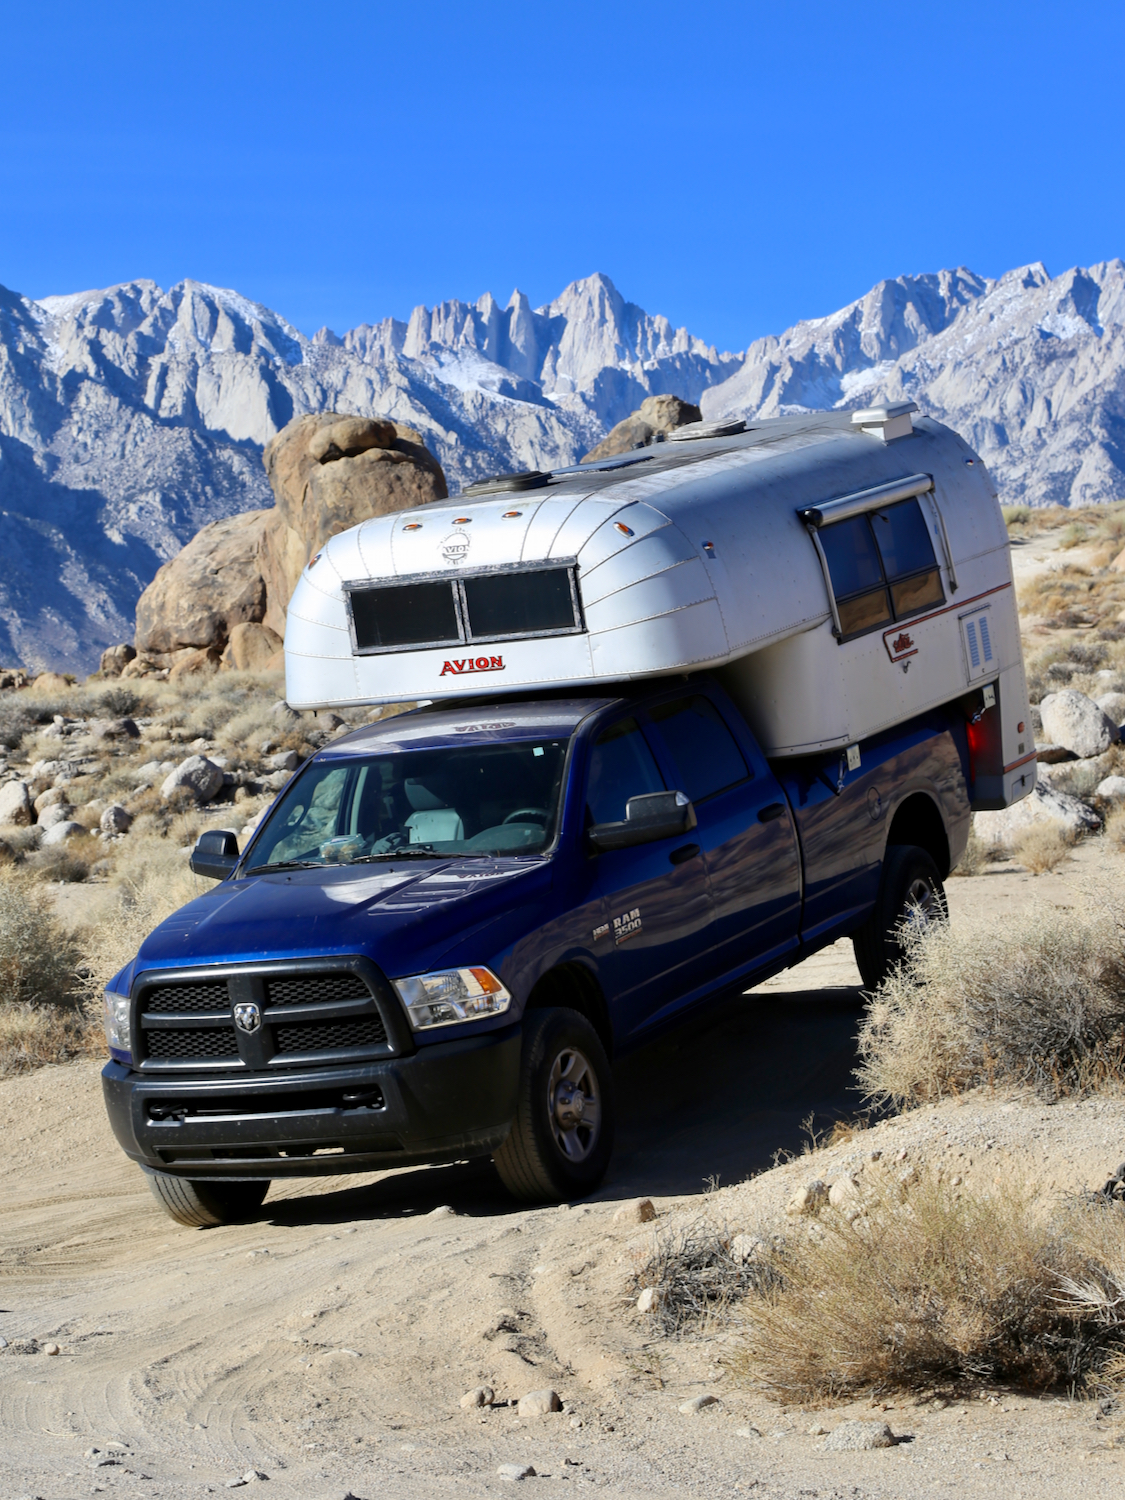 Aluminum truck camper on a blue truck exploring the Eastern Sierras of California